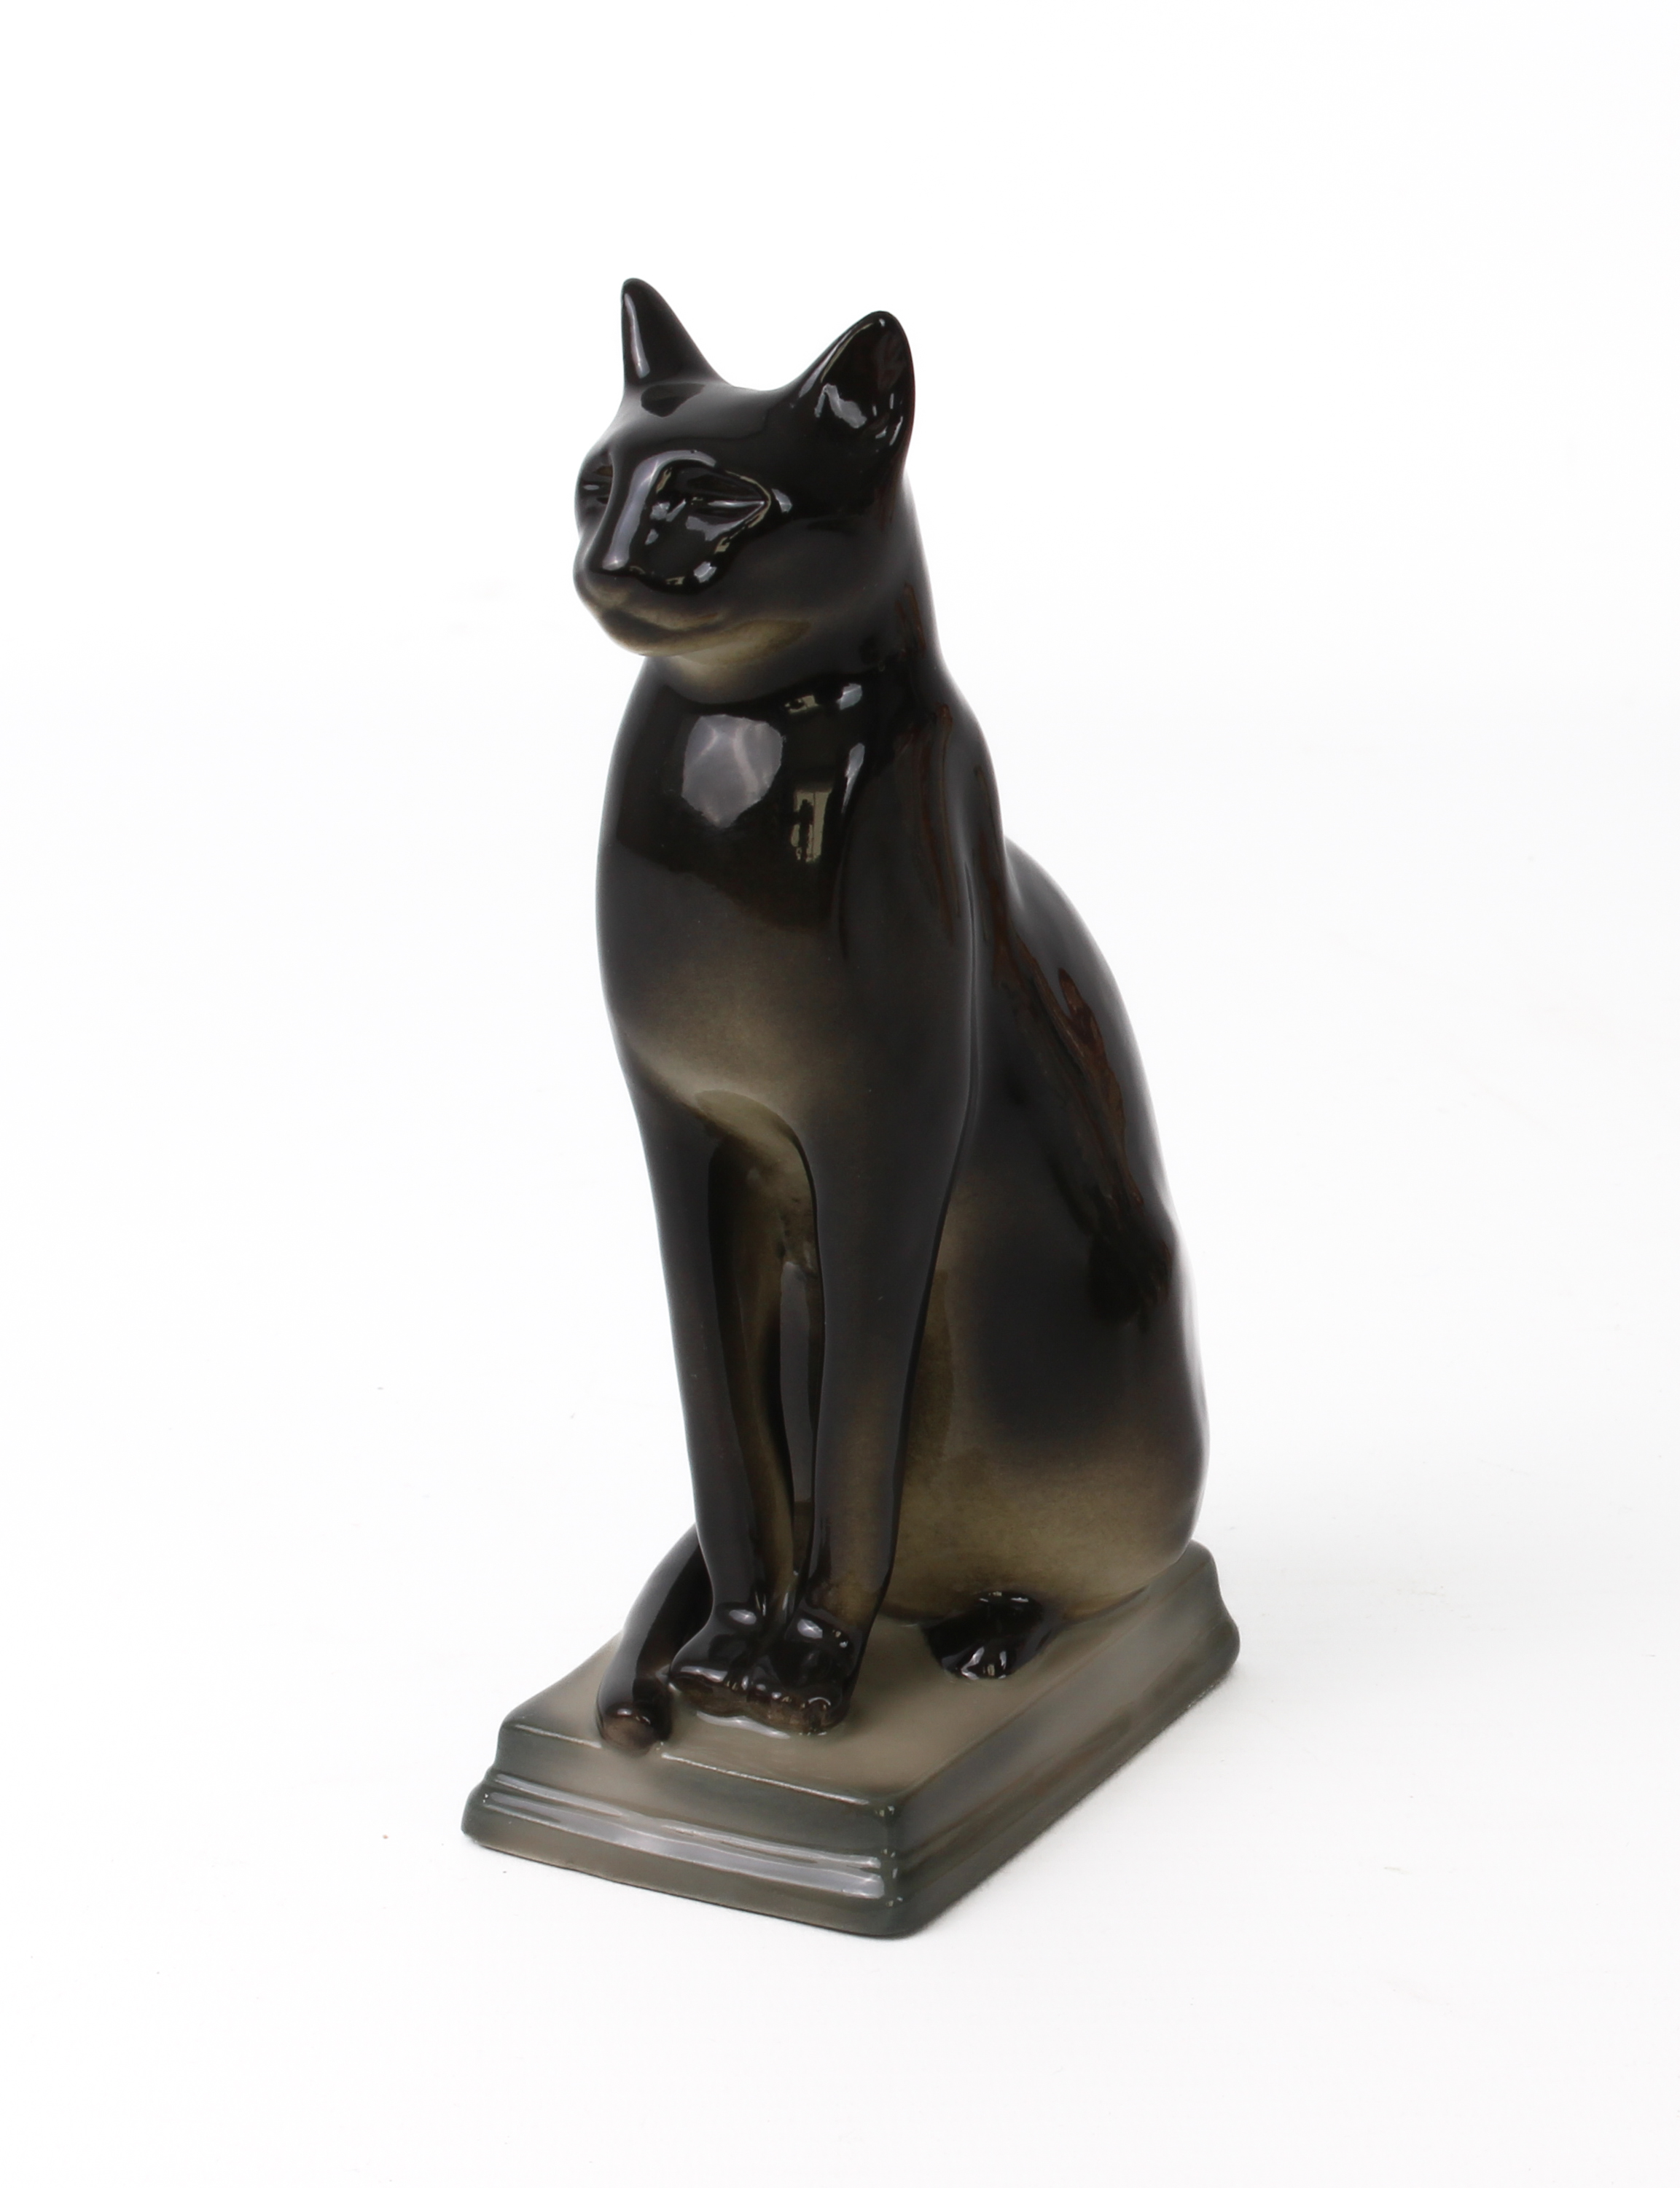 A group of seven Russian china figures of Cats by Lomonosov Porcelain - the largest 16 cm high. - Image 4 of 6